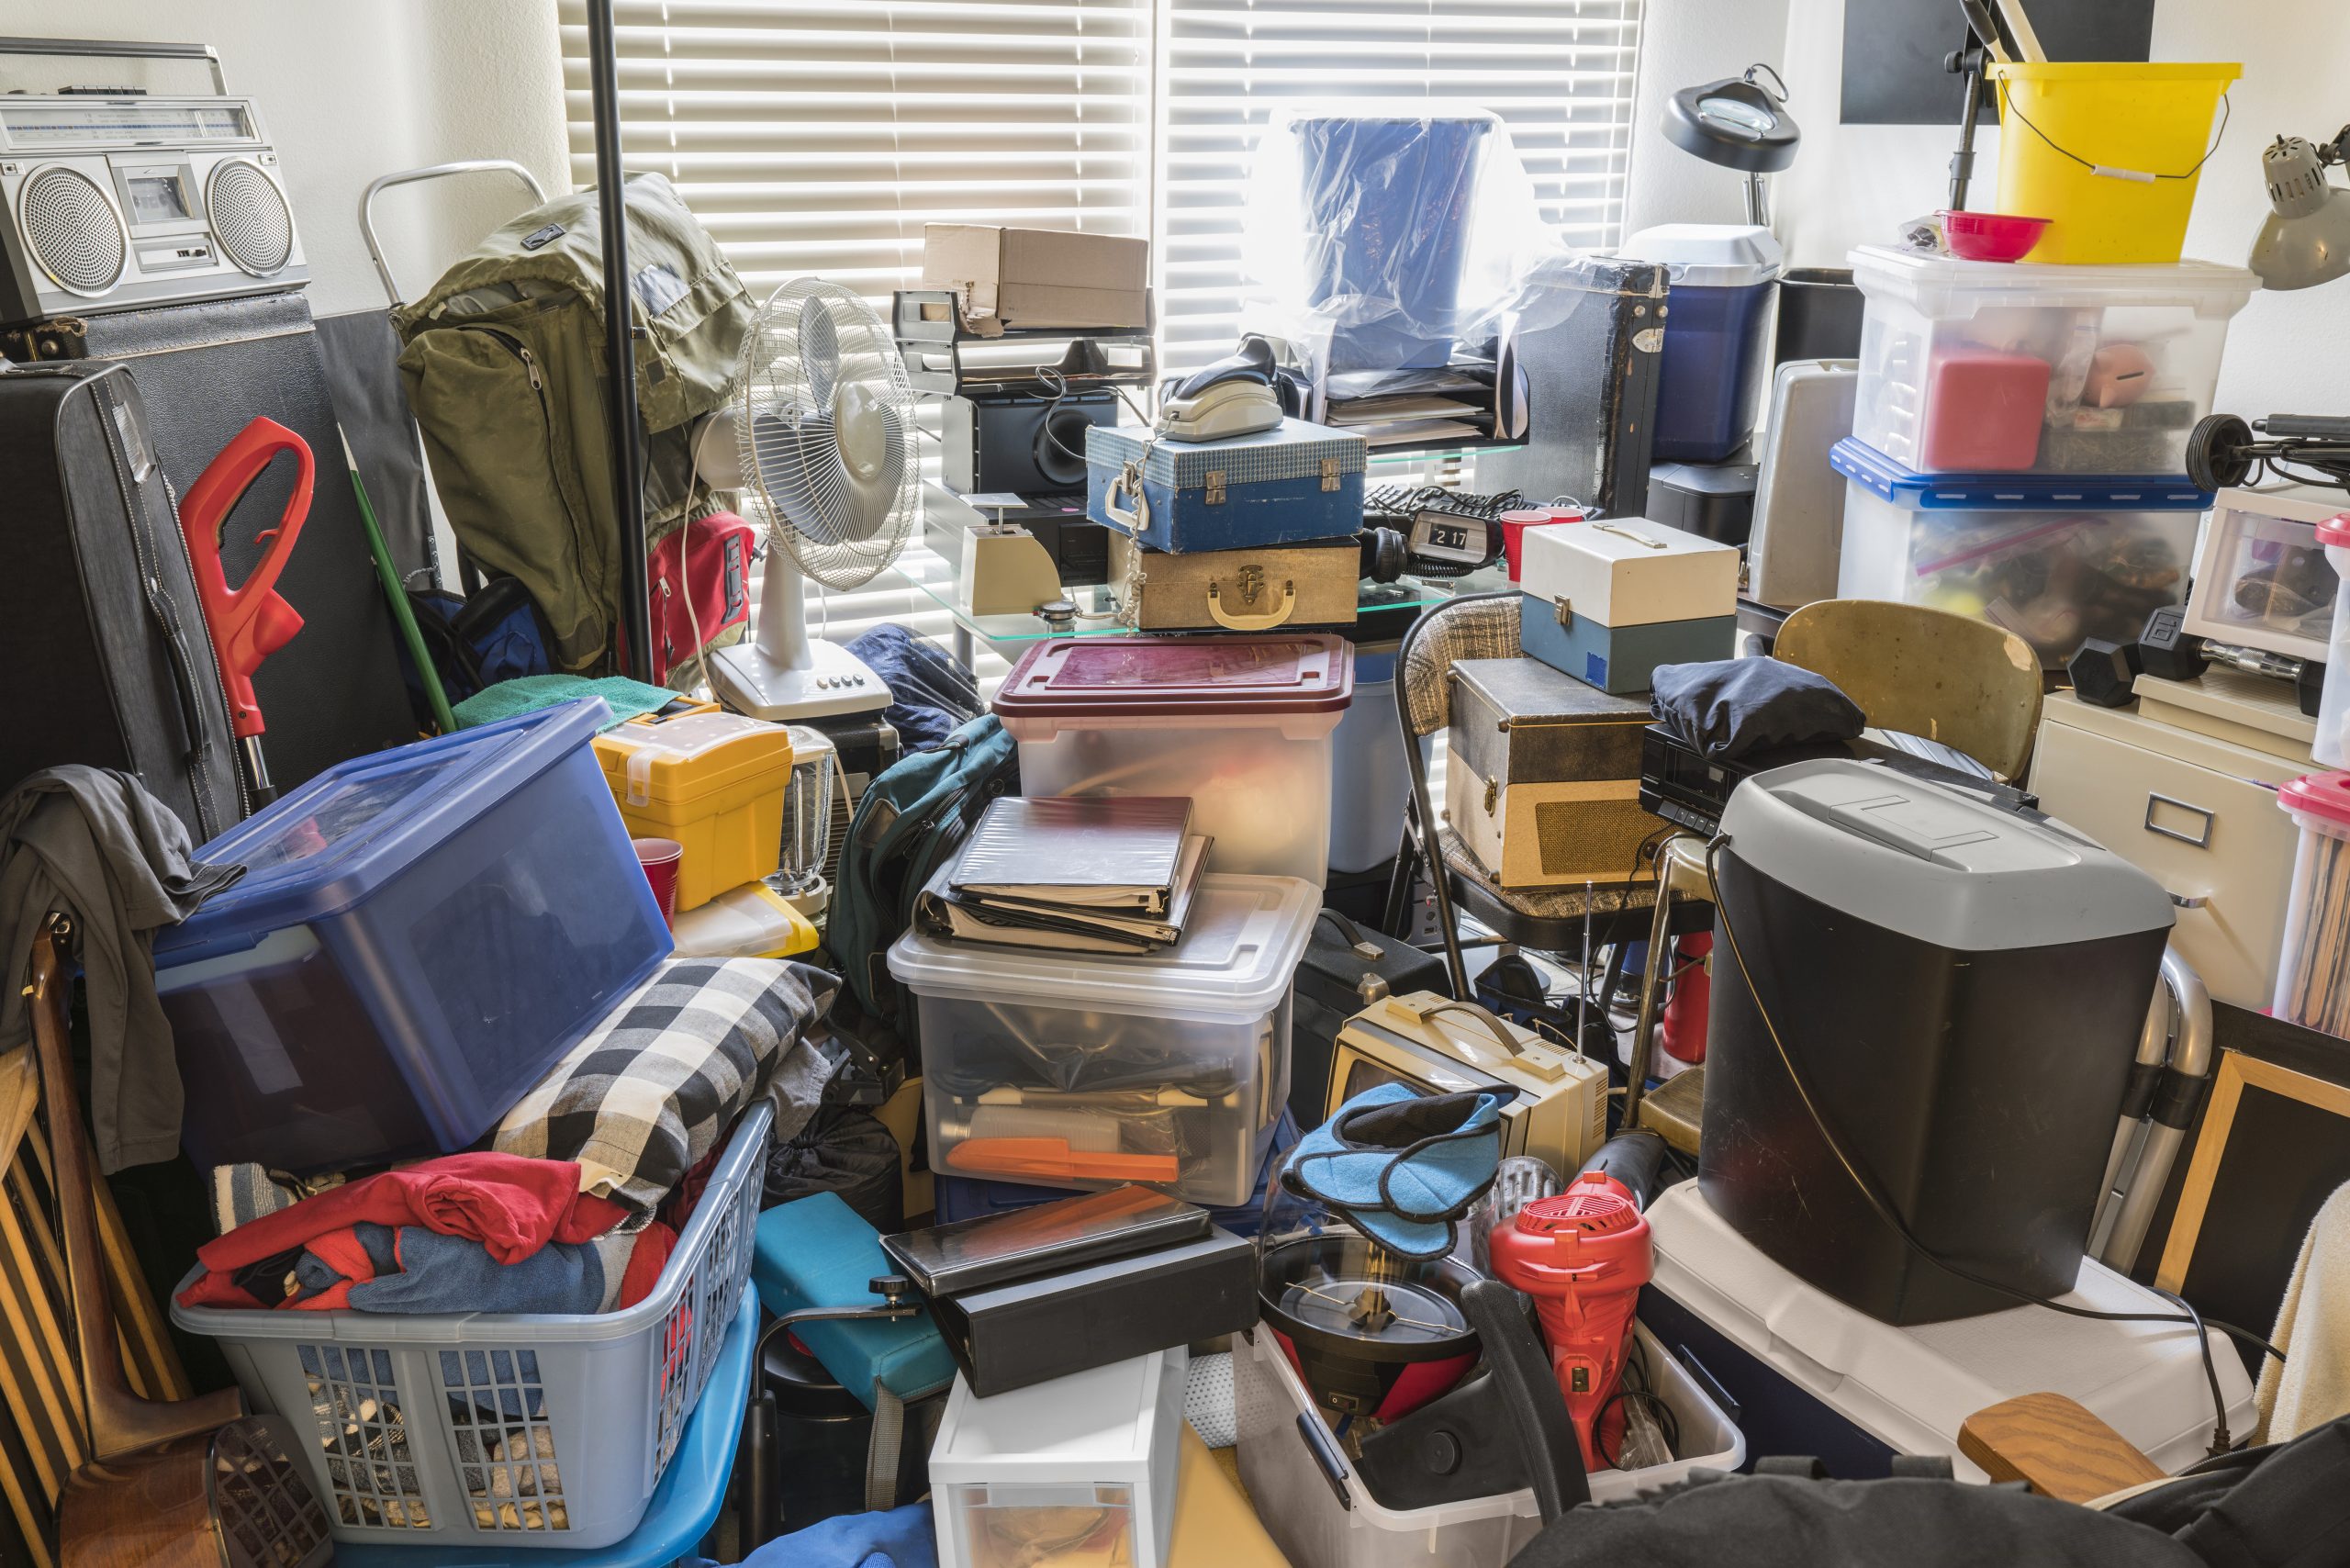 Hoarding Cleanup Waste Management Services The Junk Guys Edmonton